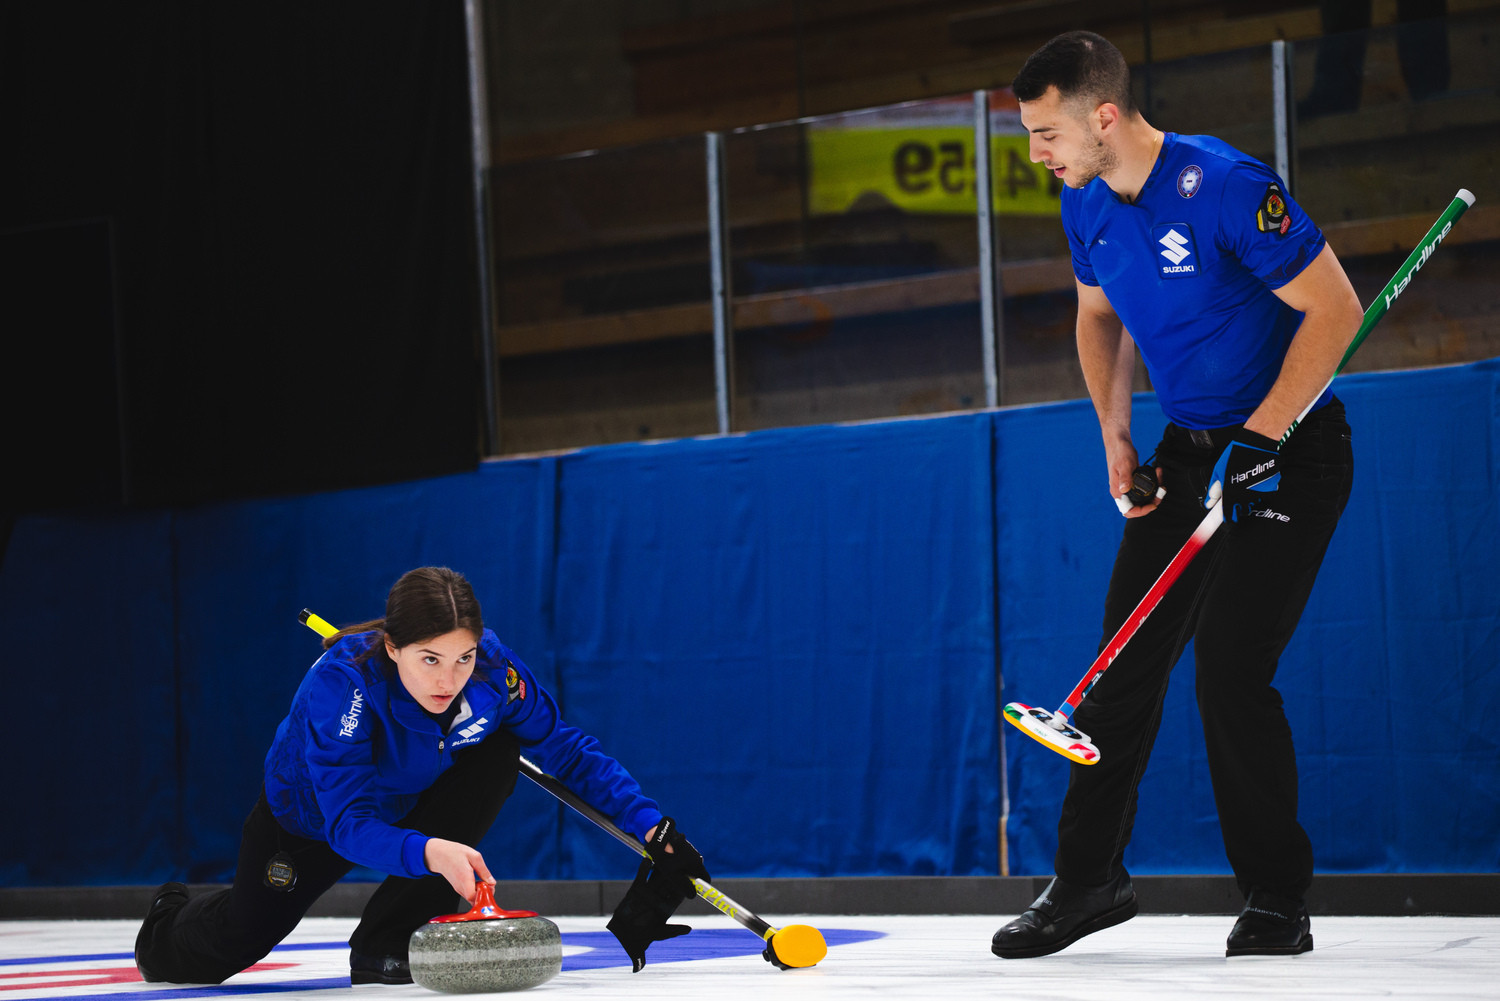 Italy start strongly at World Mixed Doubles Curling Championship